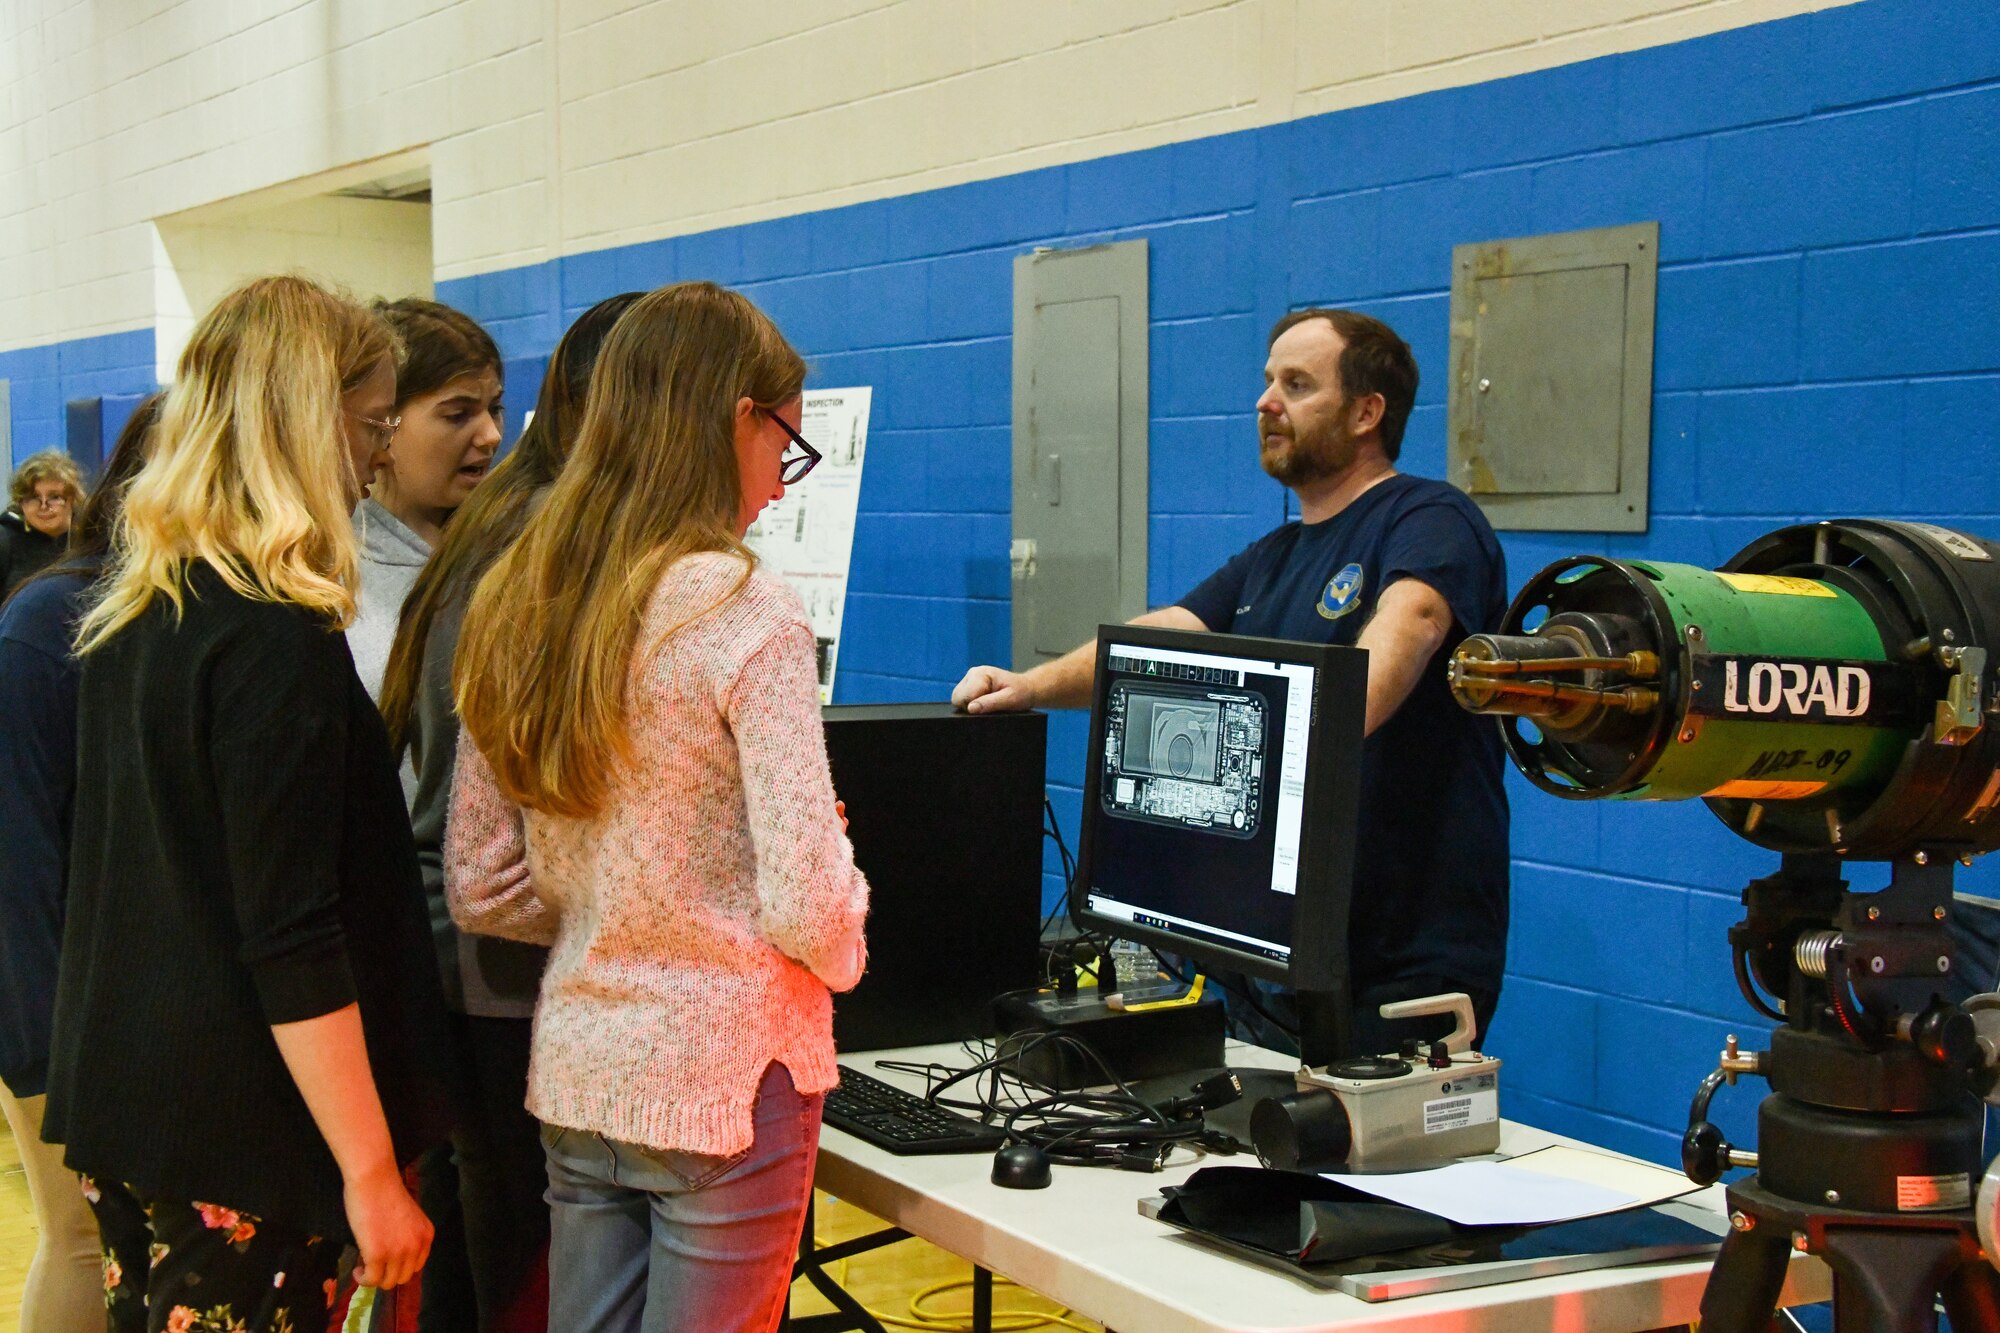 Nathan Bucholzer, 97th Maintenance Squadron nondestructive inspection technician (NDI), explains his job to a group of Altus Junior High School students at Altus High School, Altus, Oklahoma, March 30, 2022. NDIs test for defects in structures, vessels and vehicles using different techniques including ultrasonic, electromagnetic and dye penetrant testing. (U.S. Air Force photo by Airman 1st Class Miyah Gray)